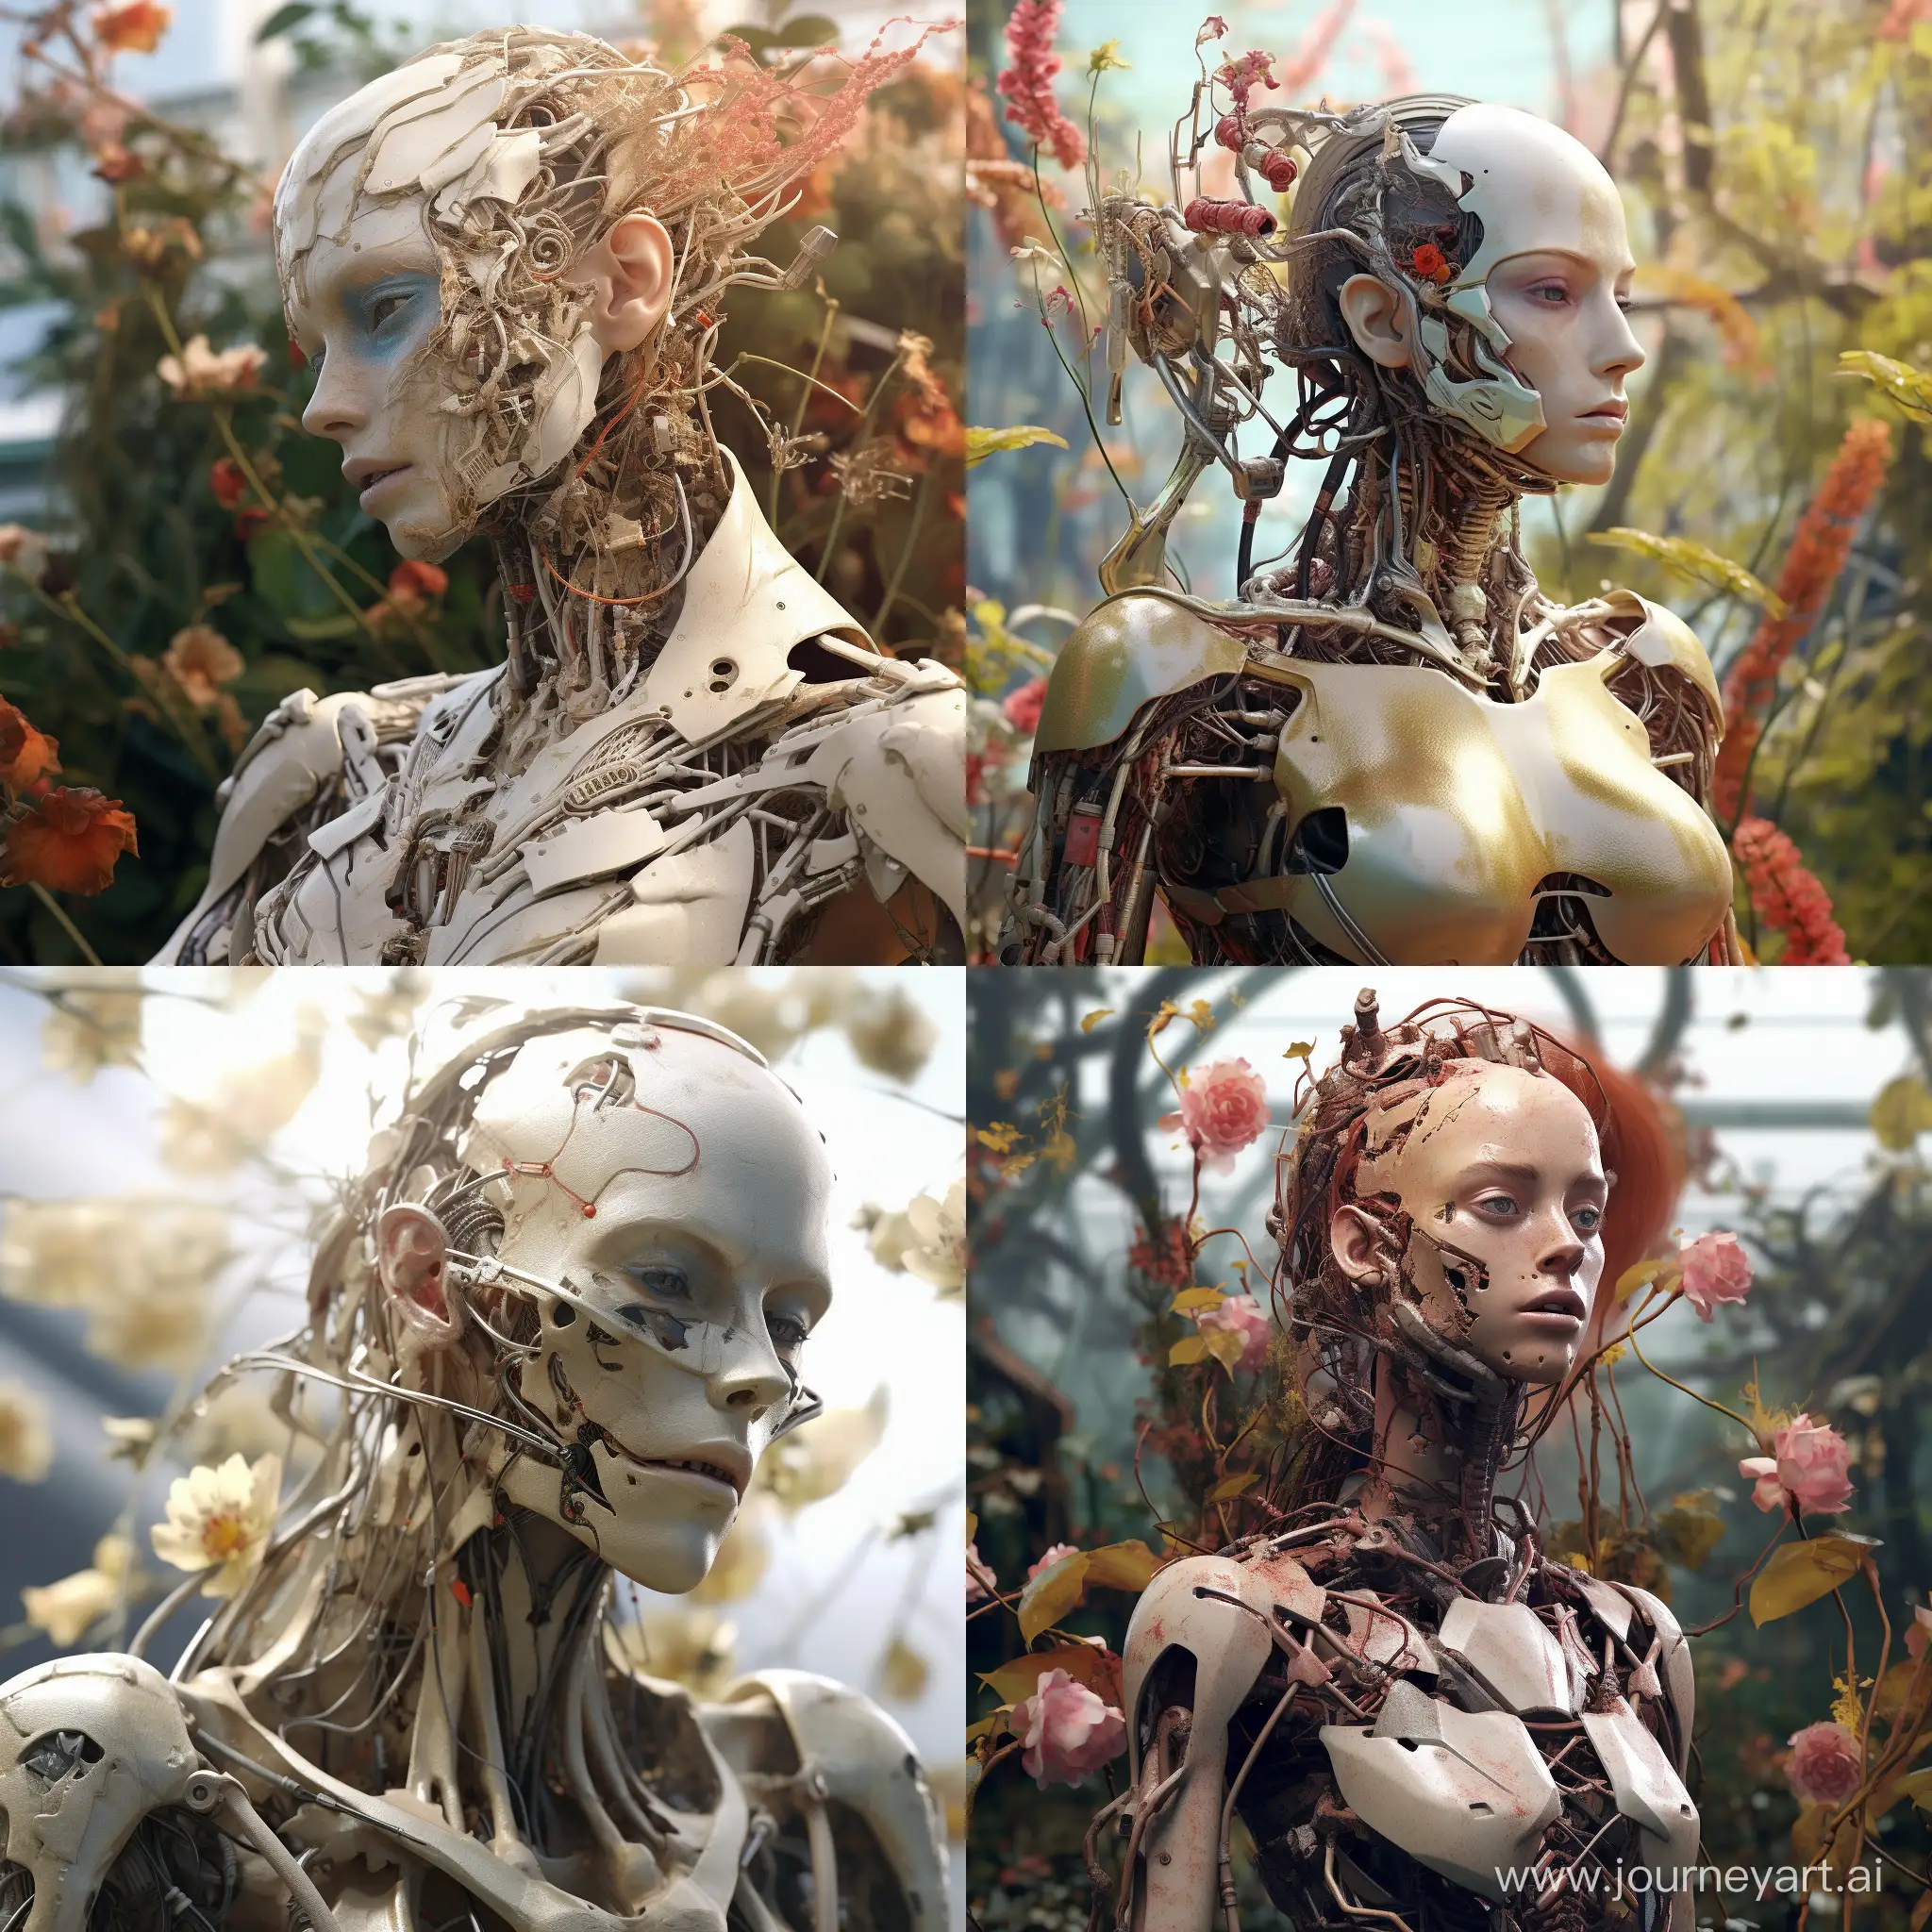 Surreal-Biomechanical-Cyborg-Amidst-Withered-Nature-at-Sunset